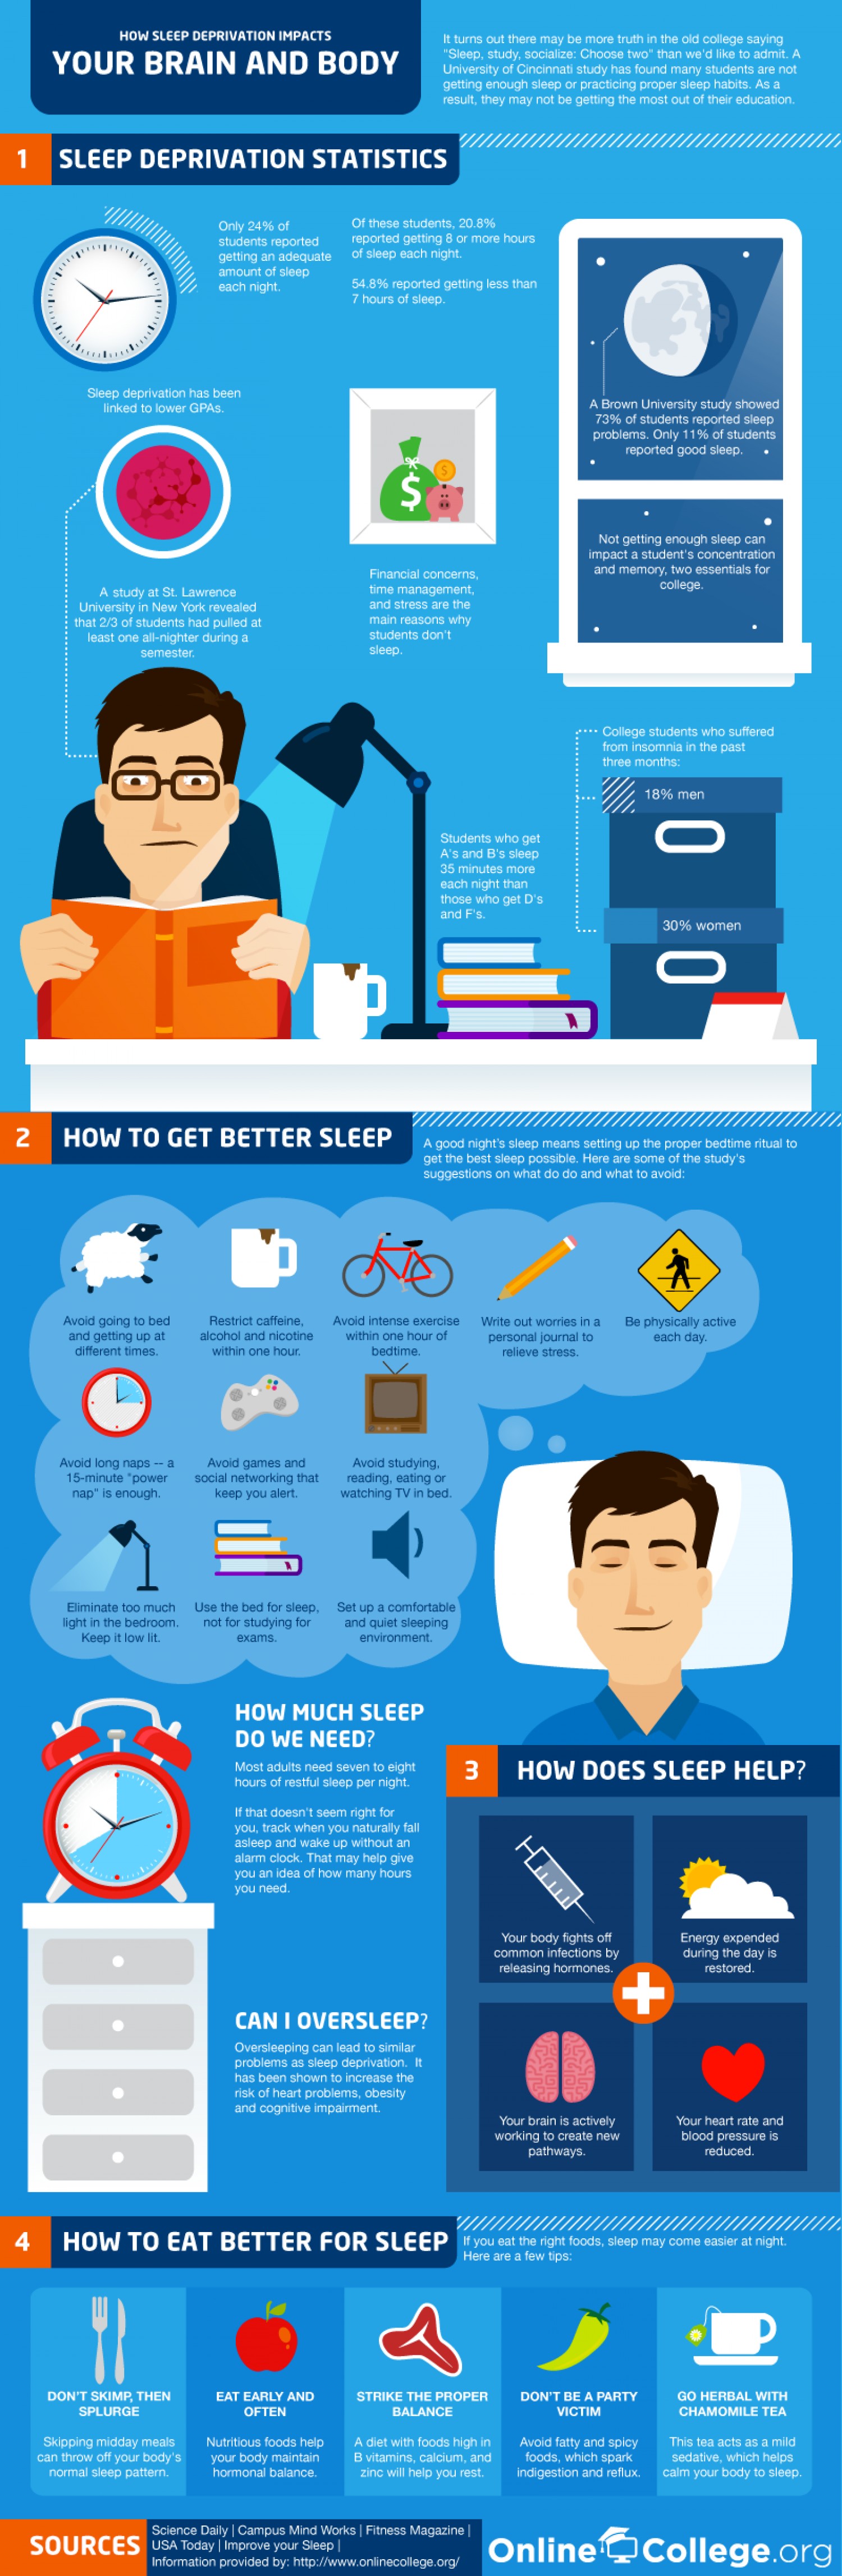 how-sleep-deprivation-affects-your-brain--body_5029163019d71_w1500